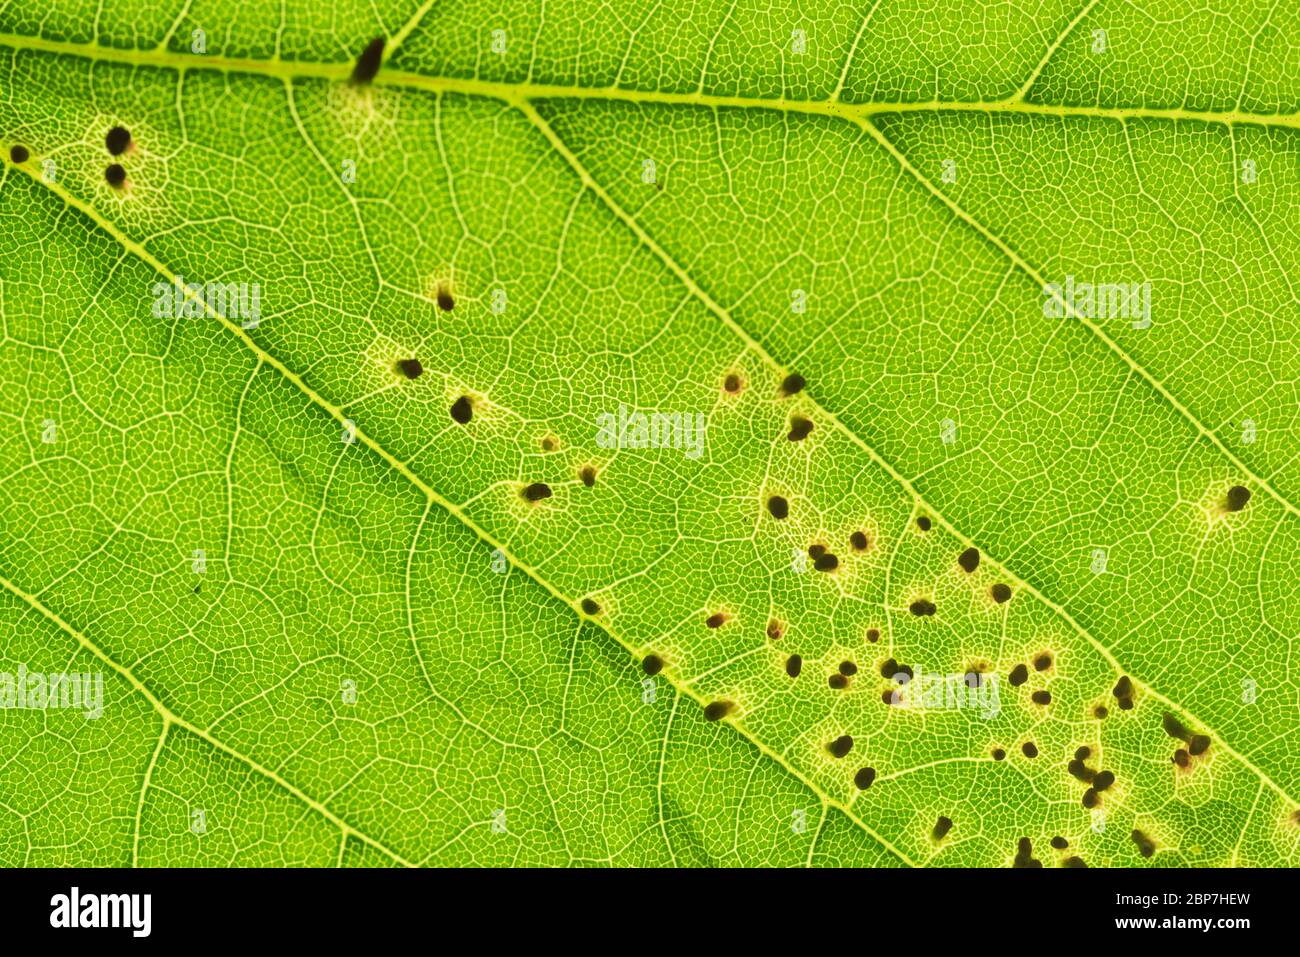 Back-lit Sycamore leaf with galls of a gall mite (Aceria sp) Stock Photo